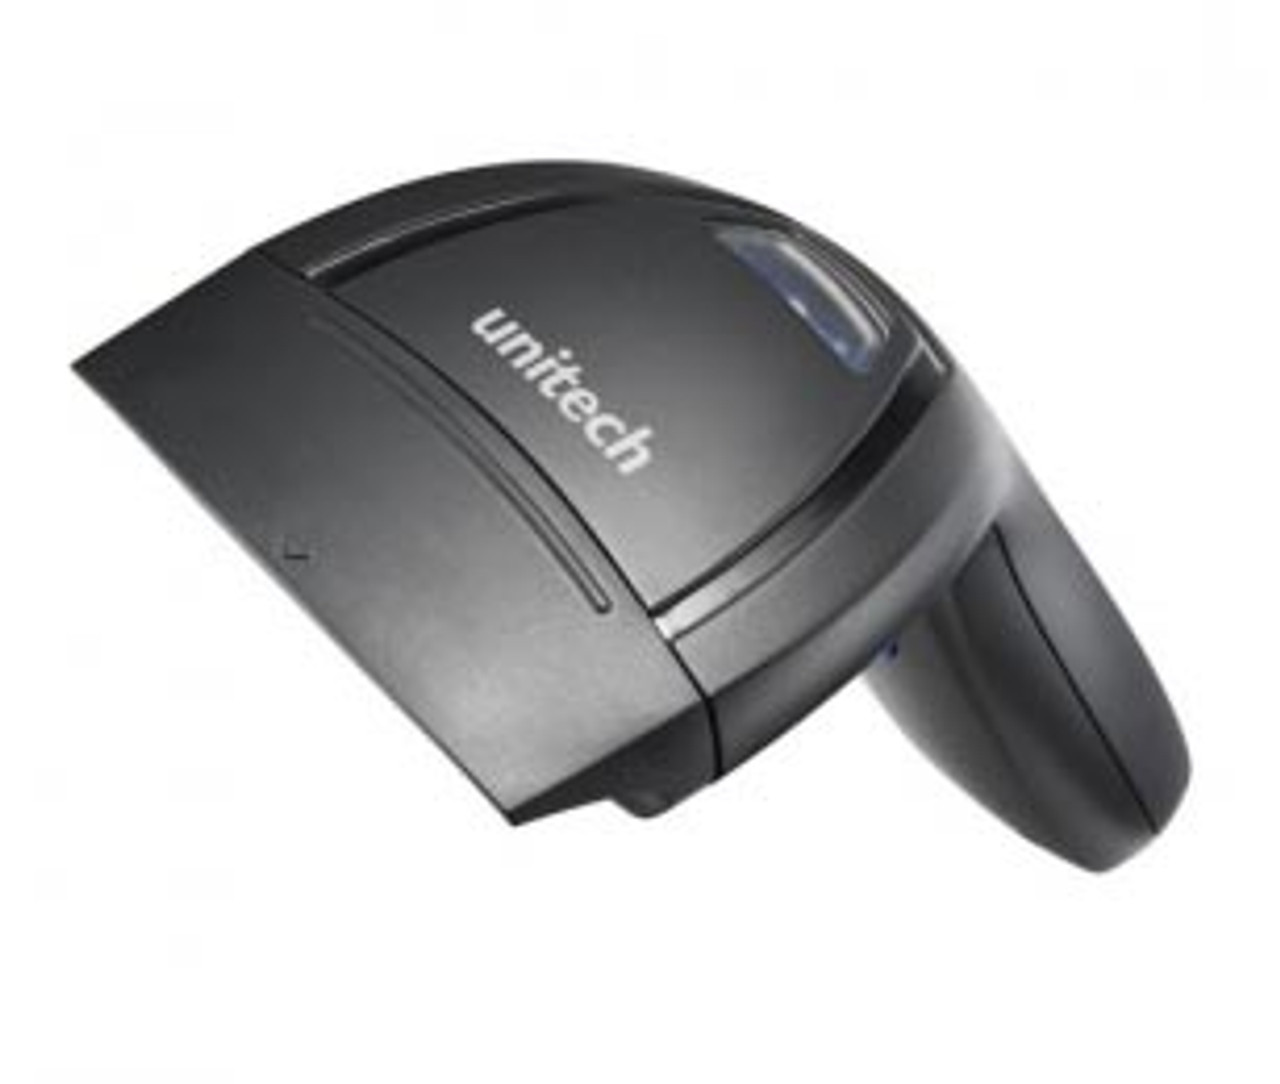 Unitech MS250 CCD Hand Scanner (USB input) - A Budget Minded Workhorse!